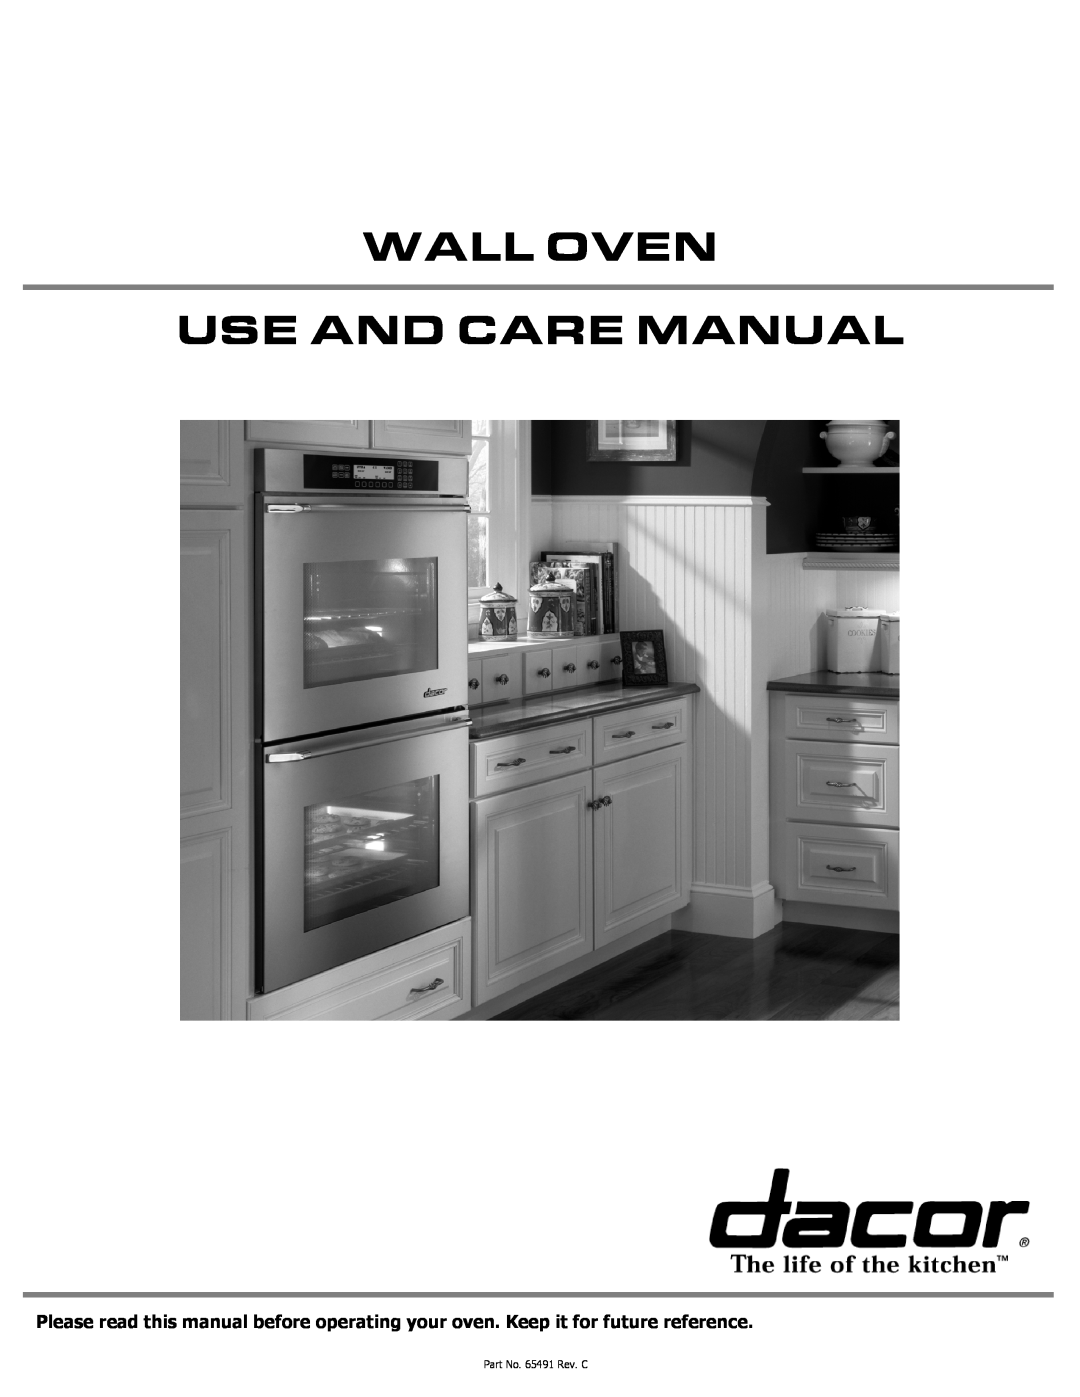 Dacor manual Wall Oven Use And Care Manual, Part No. 65491 Rev. C 